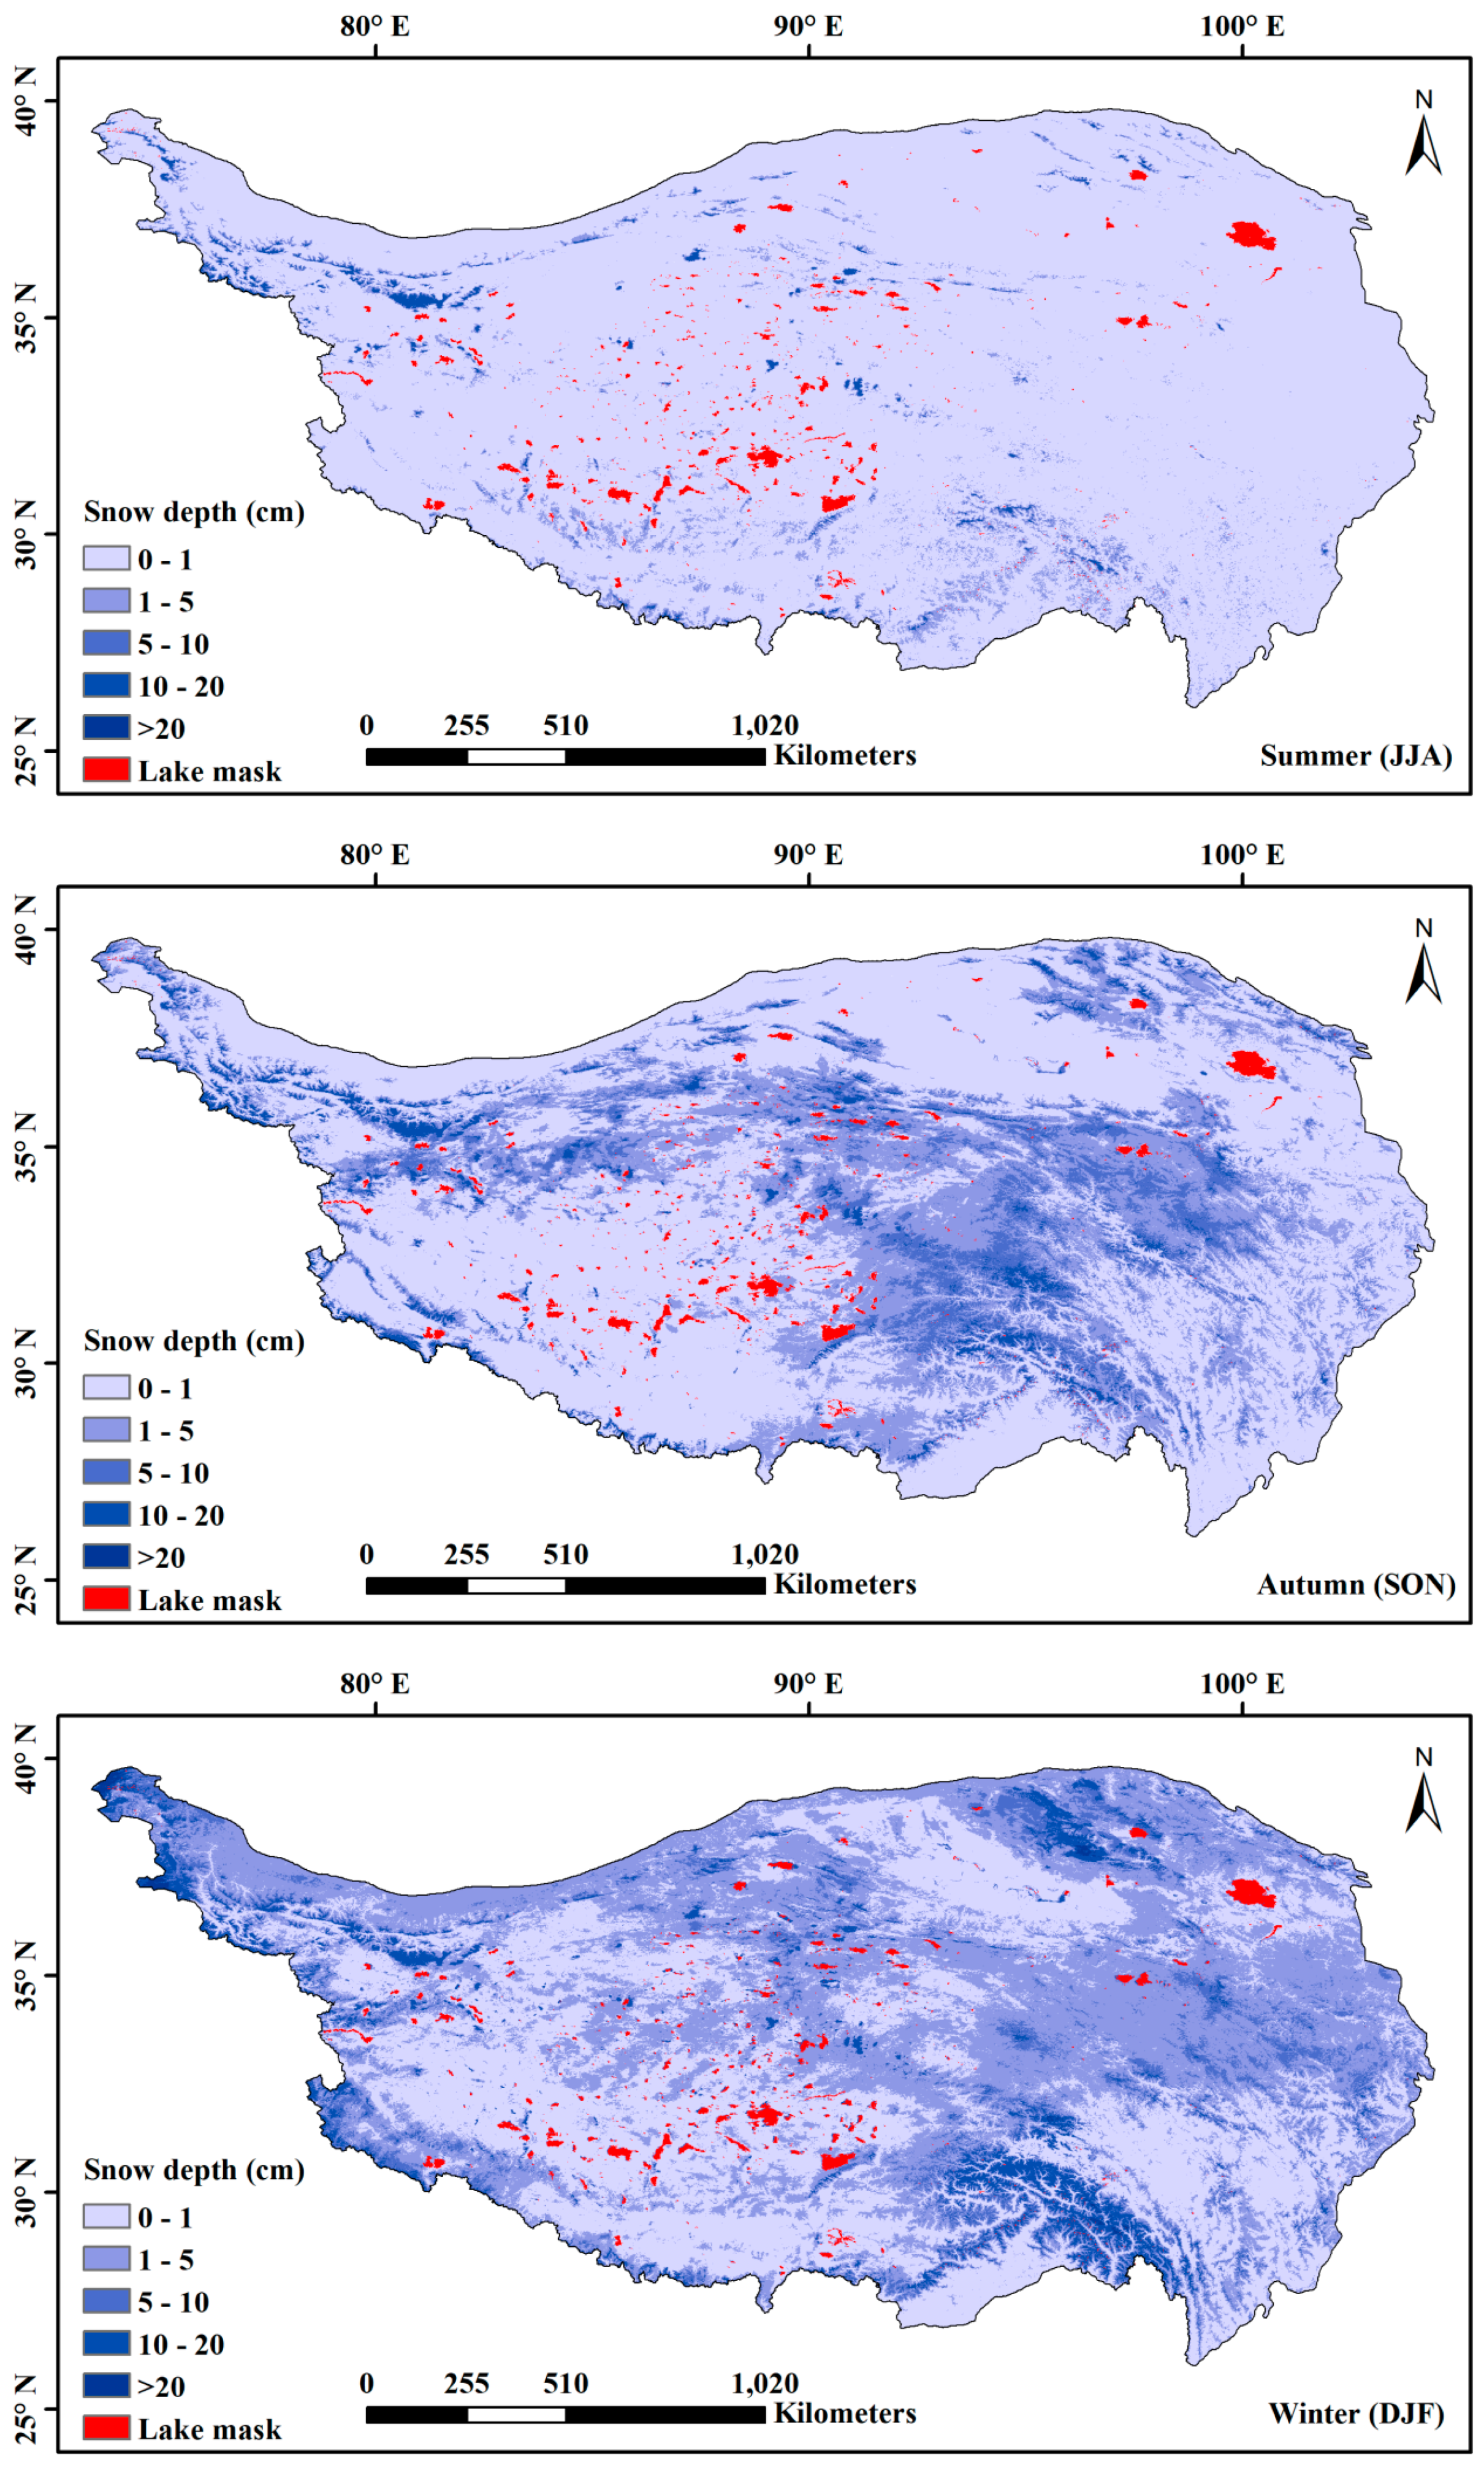 TC - Evaluation of snow depth and snow cover over the Tibetan